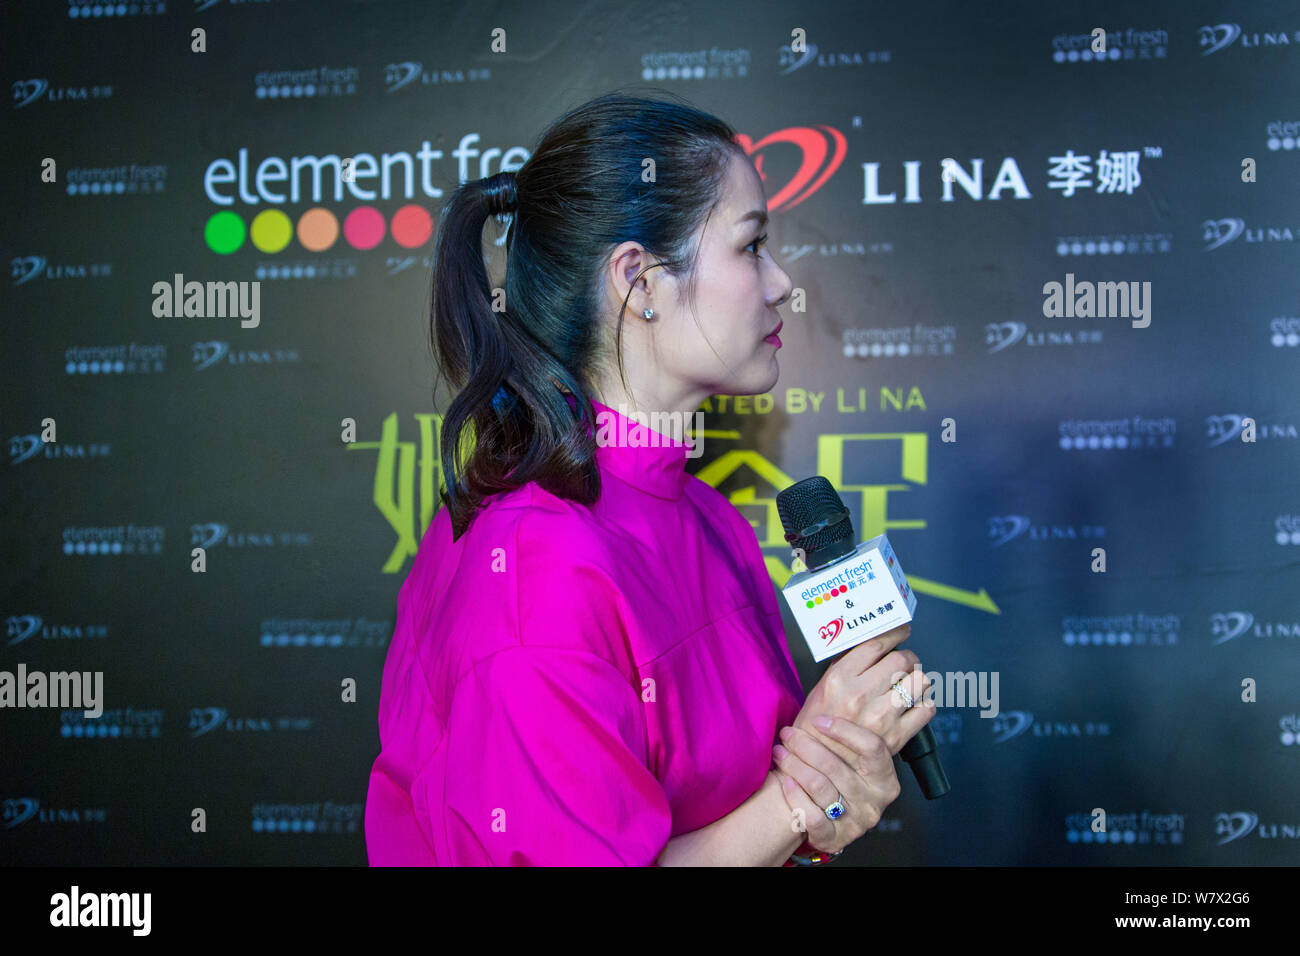 Retired Chinese tennis star Li Na attends the opening ceremony of the restaurant co-opened by her and restaurant brand 'Element Fresh' in Wuhan city, Stock Photo